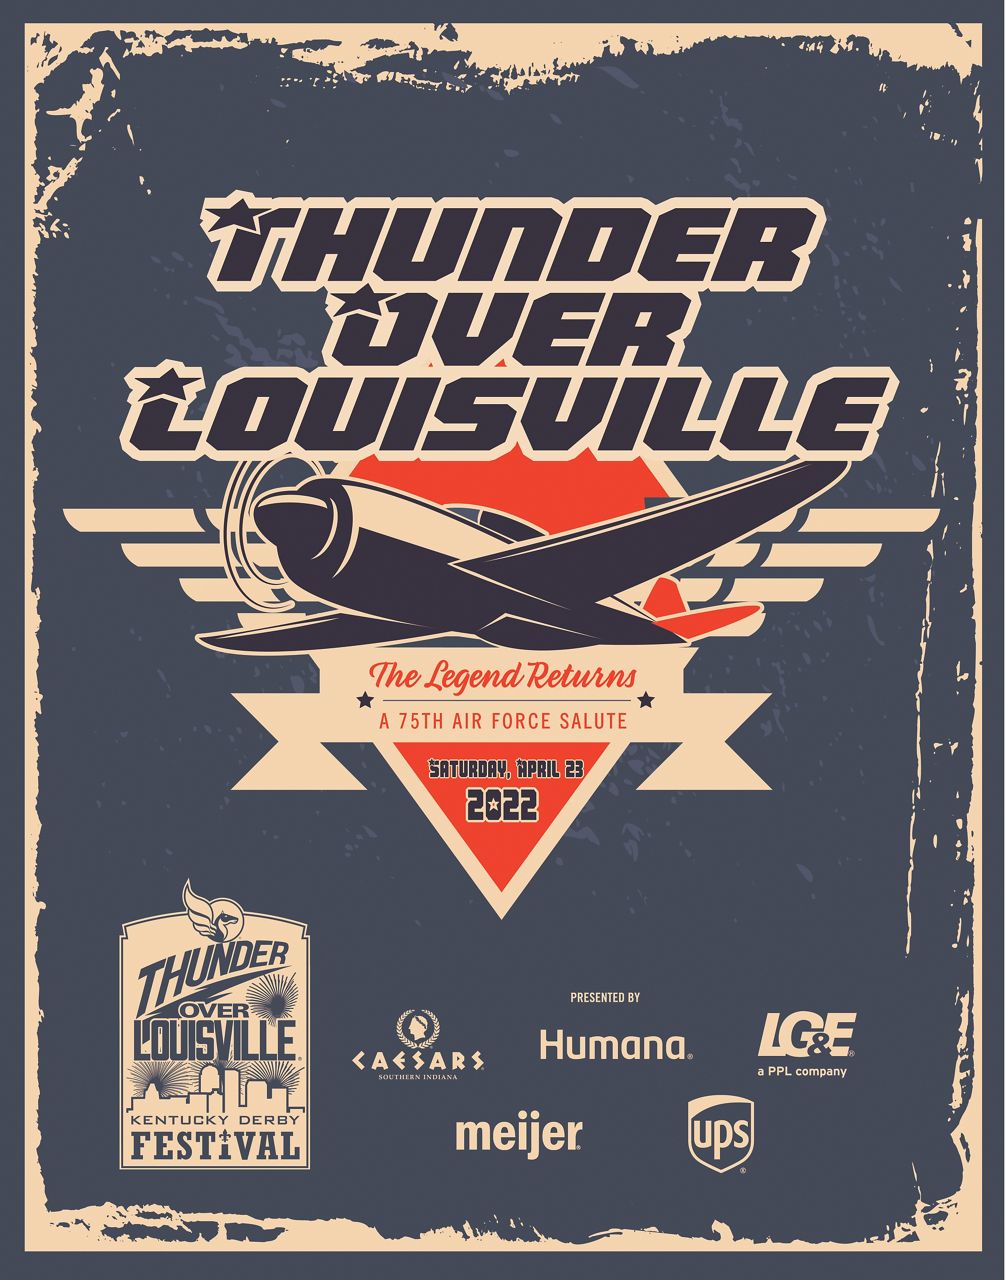 The new Thunder Over Louisville poster for 2022